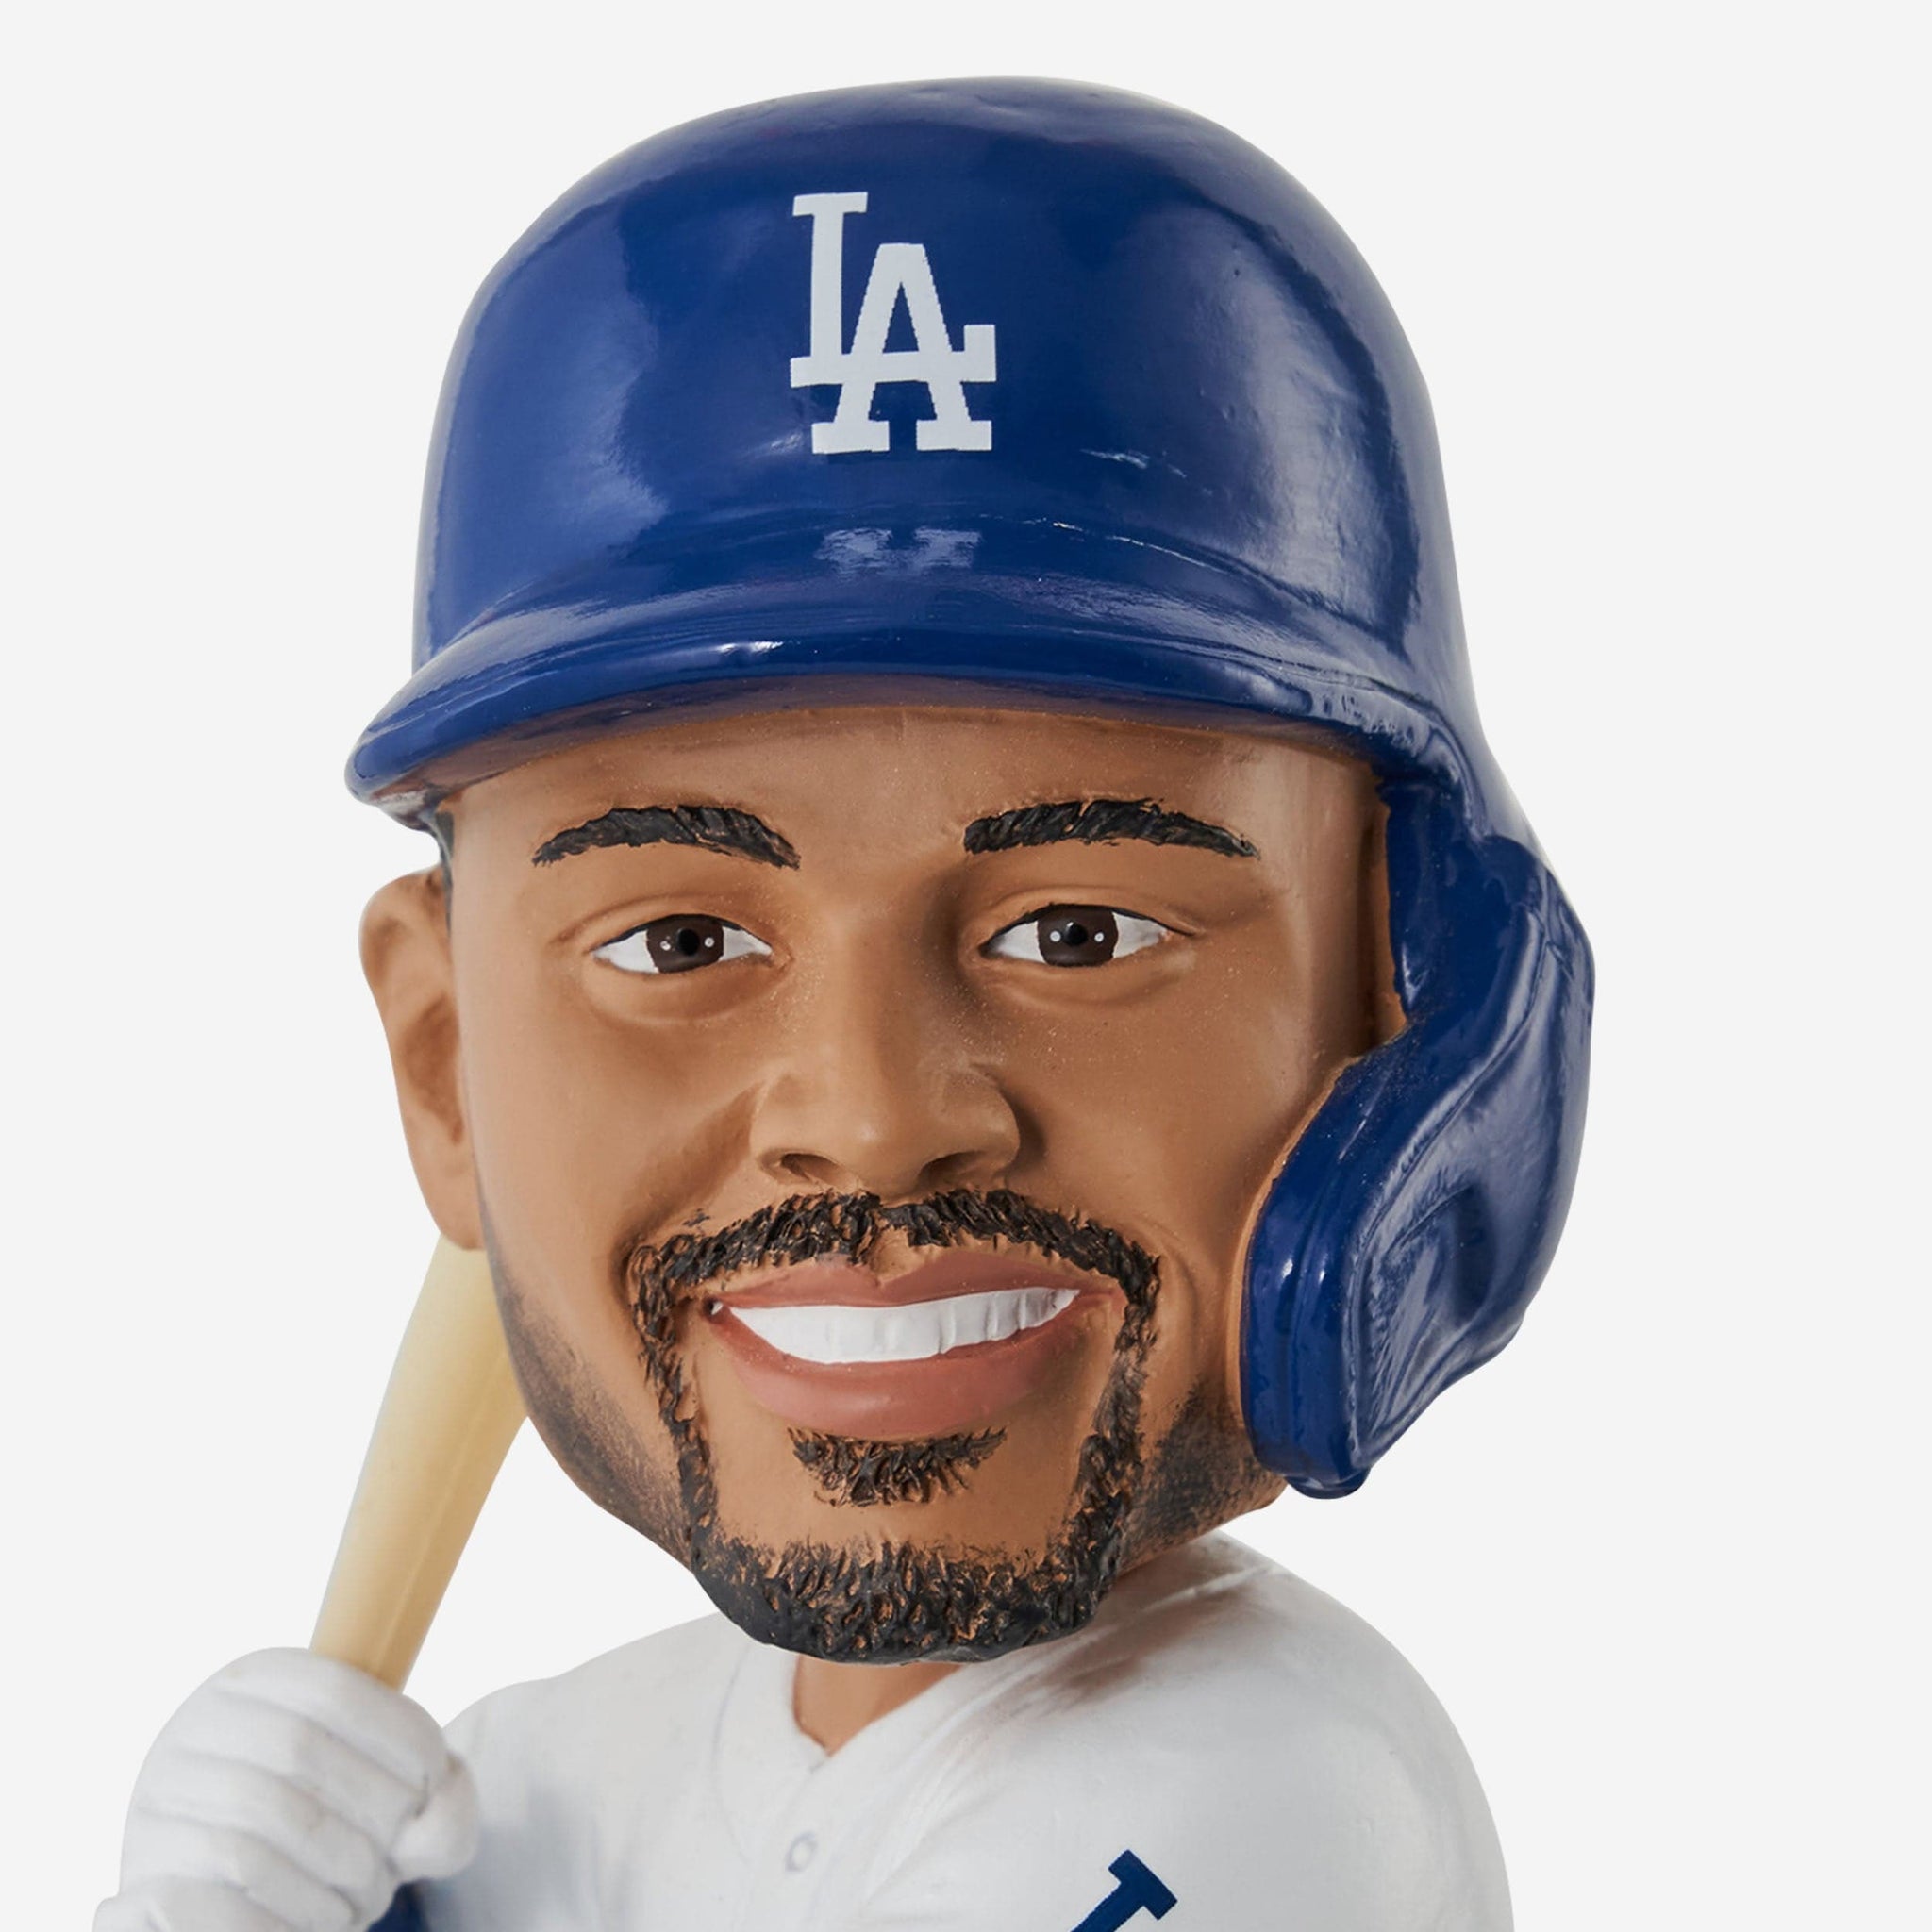 Mookie Betts Los Angeles Dodgers Bank Bobblehead Officially Licensed by MLB